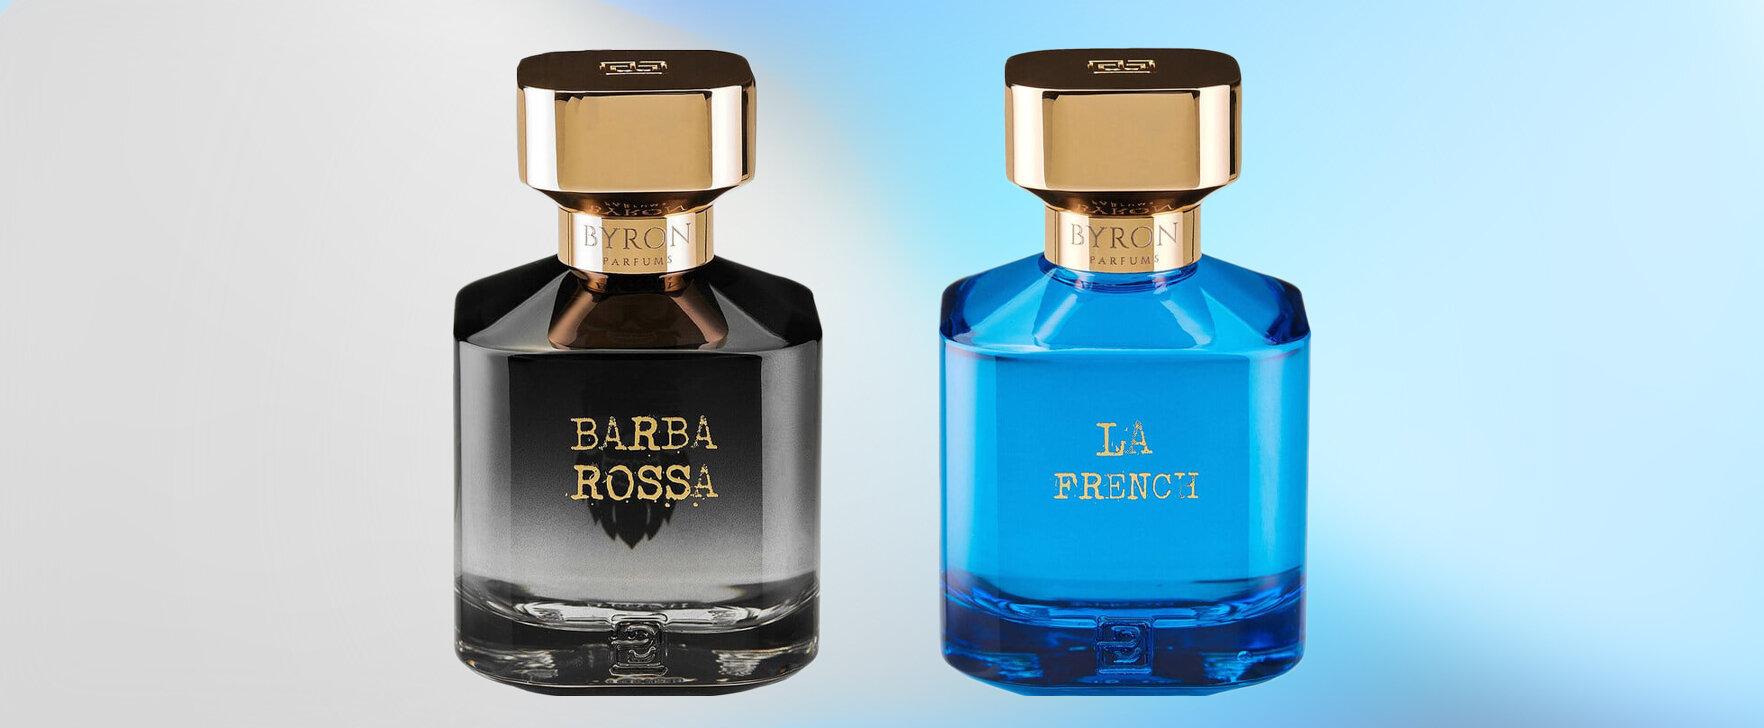 "Barba Rossa" and "La French": The New Extraits de Parfum From Byron Parfums